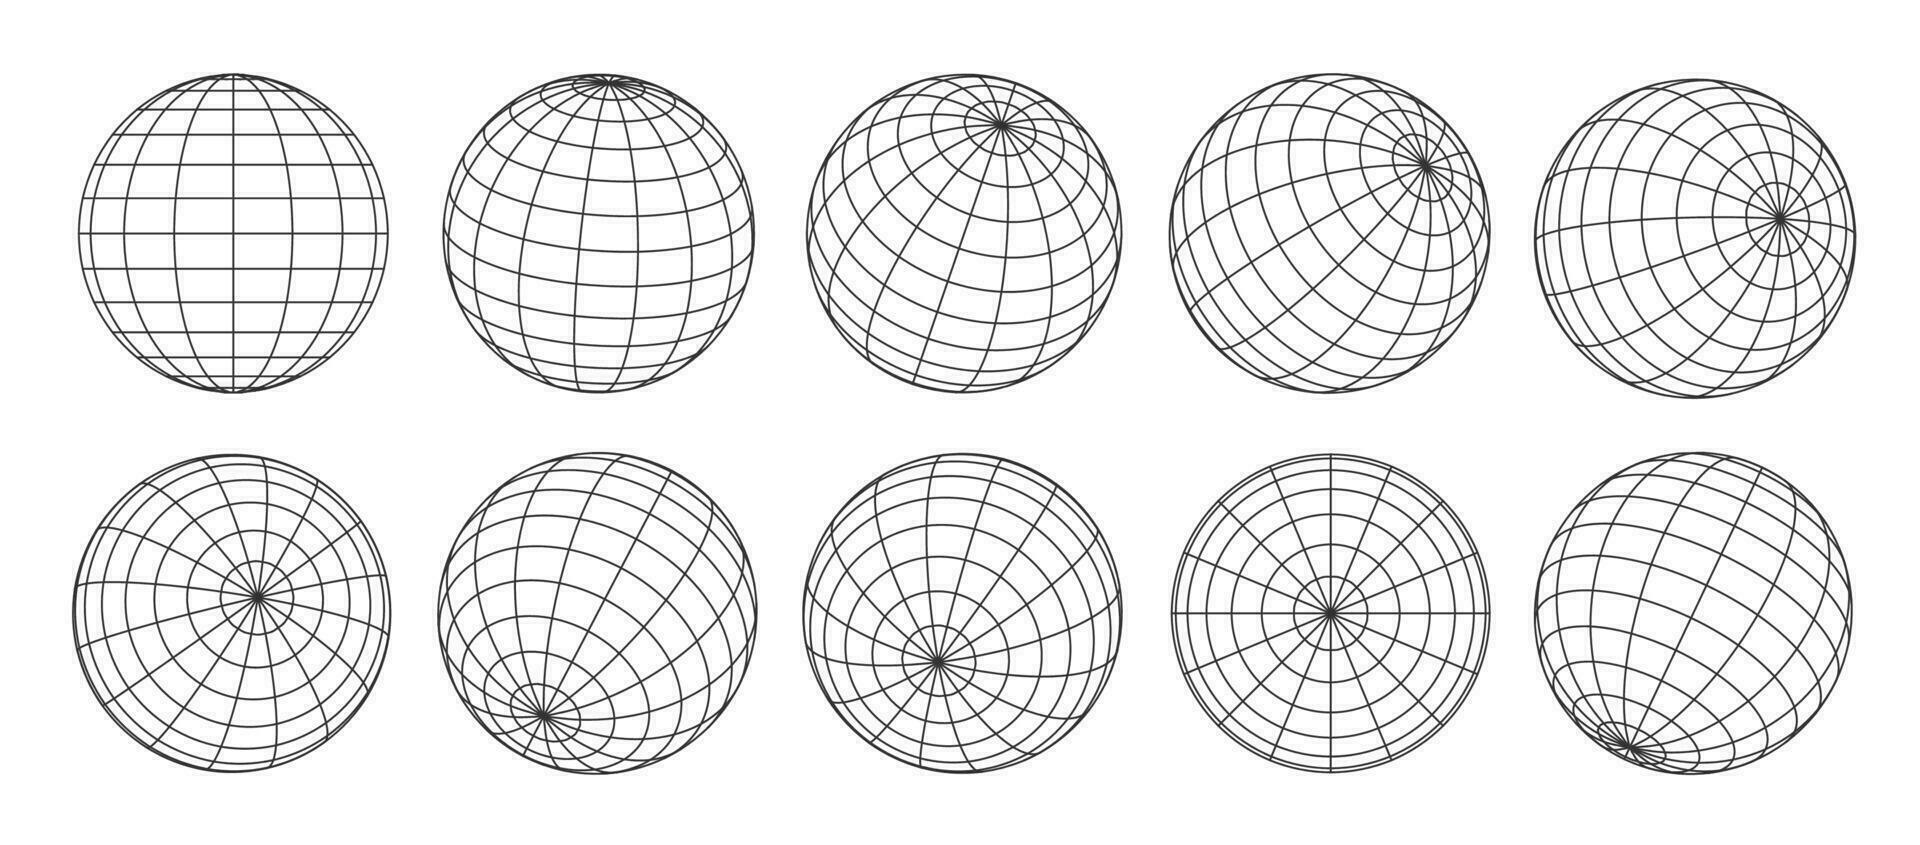 3d globe grid, planet sphere and ball wireframe vector